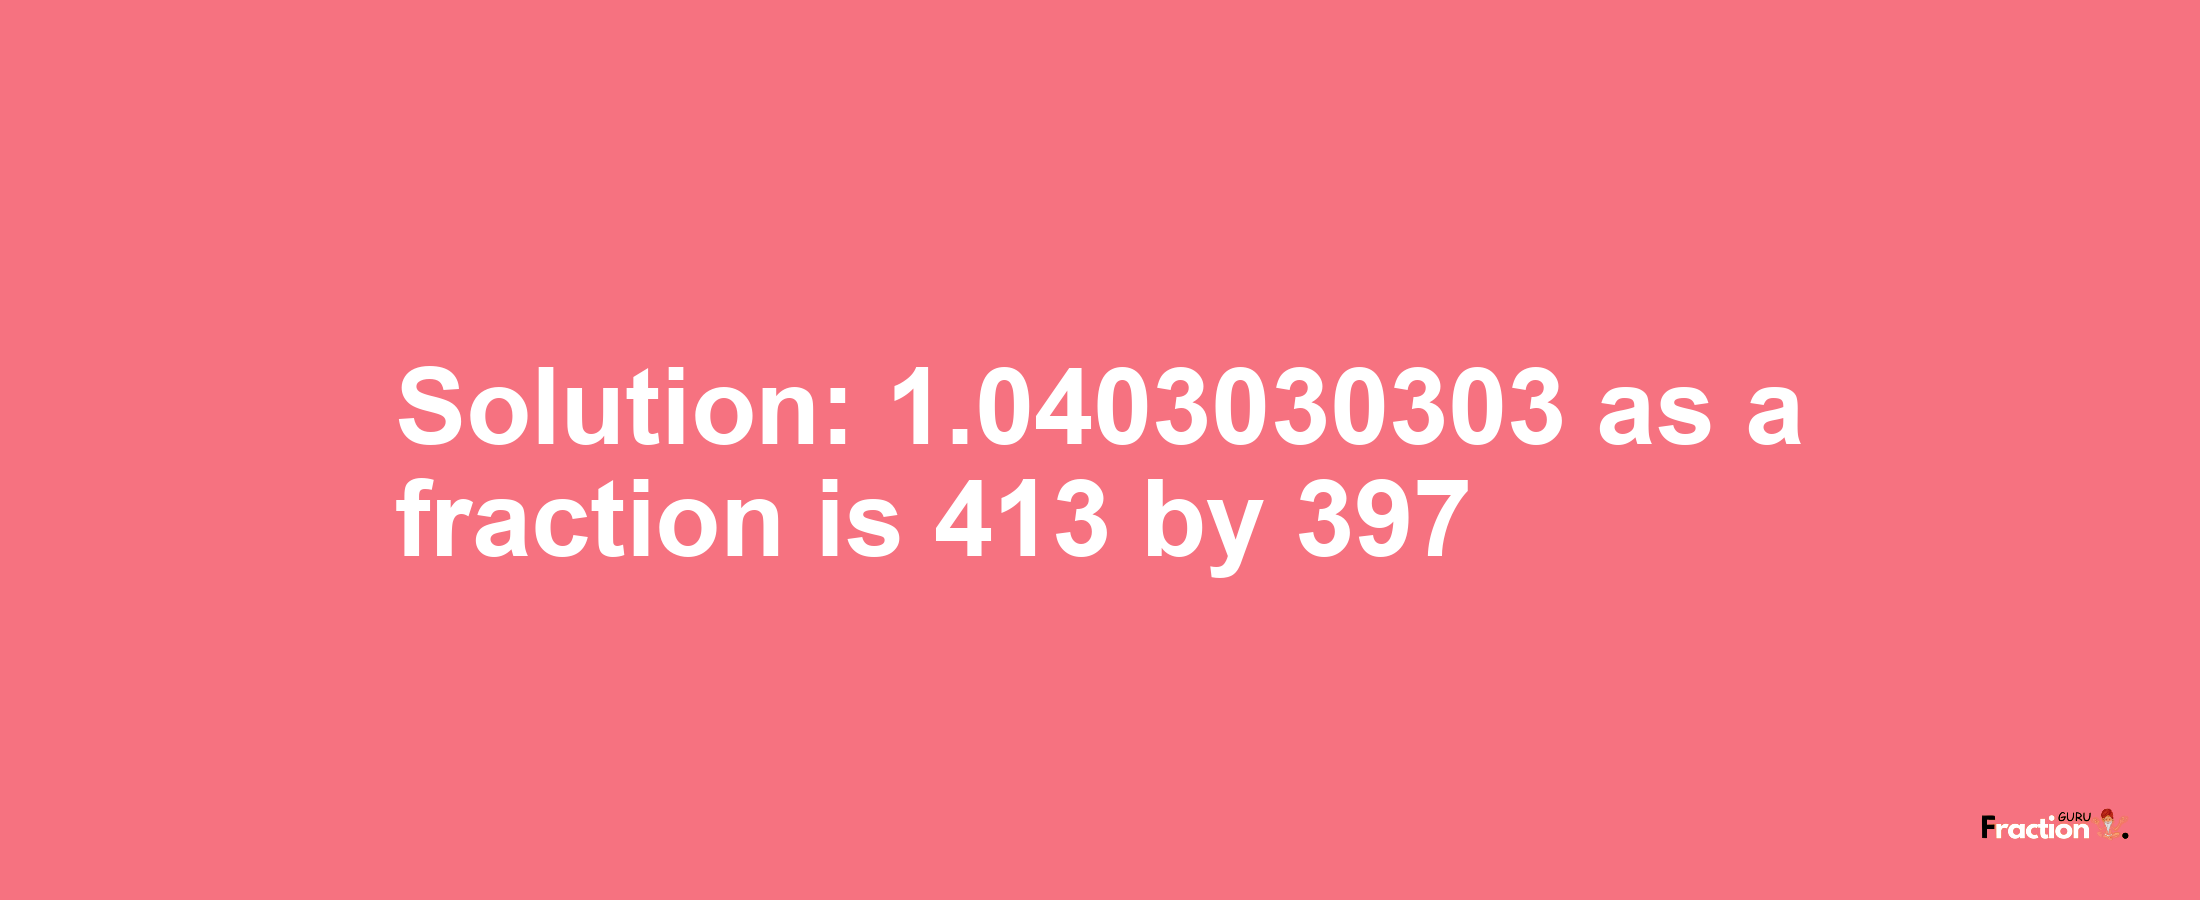 Solution:1.0403030303 as a fraction is 413/397